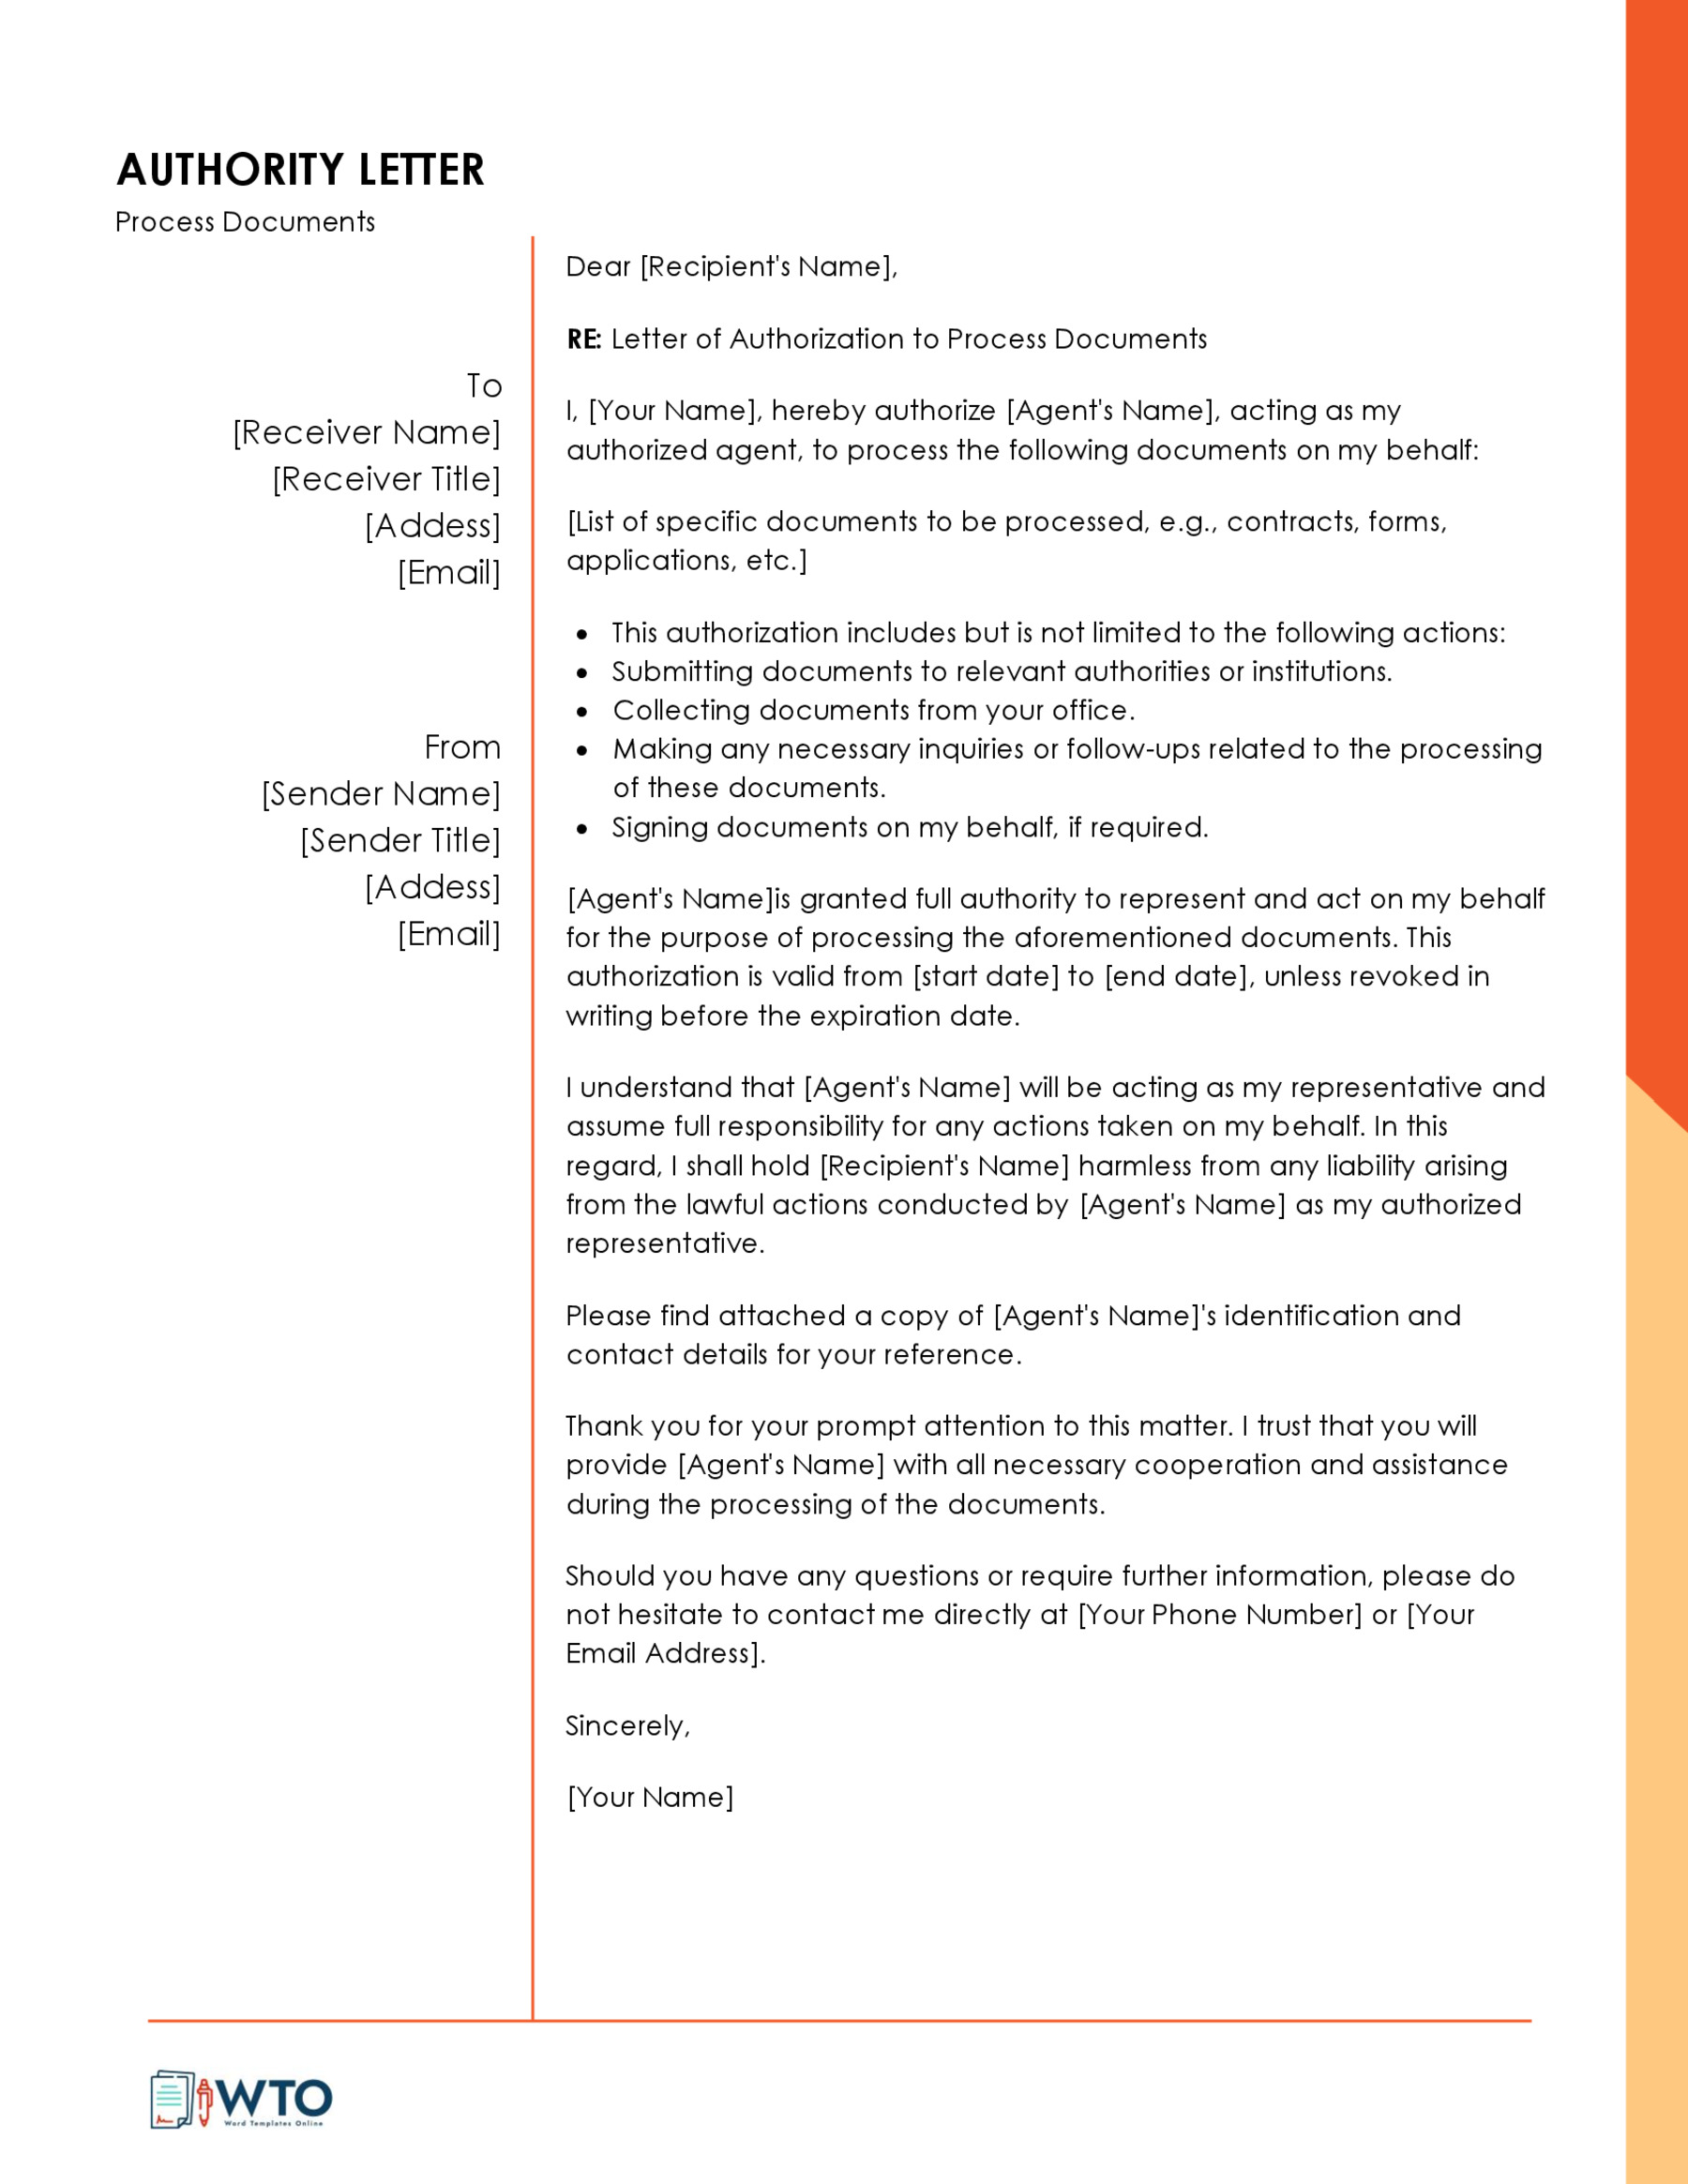 Letter of Giving Permission to Process Documents Template in ms word free download